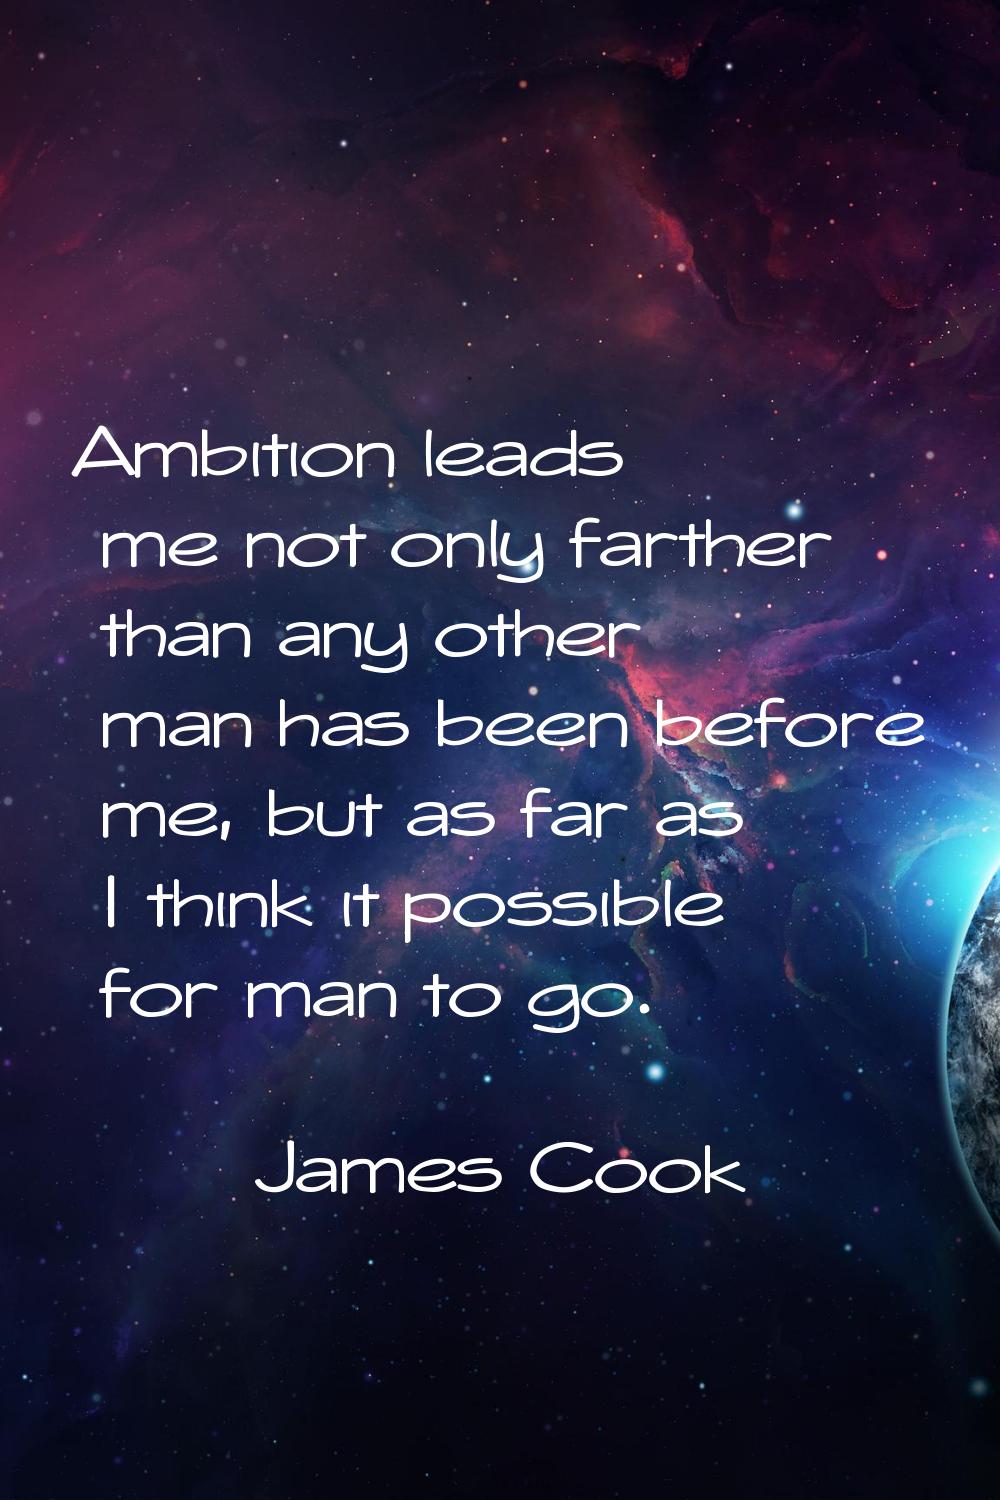 Ambition leads me not only farther than any other man has been before me, but as far as I think it 